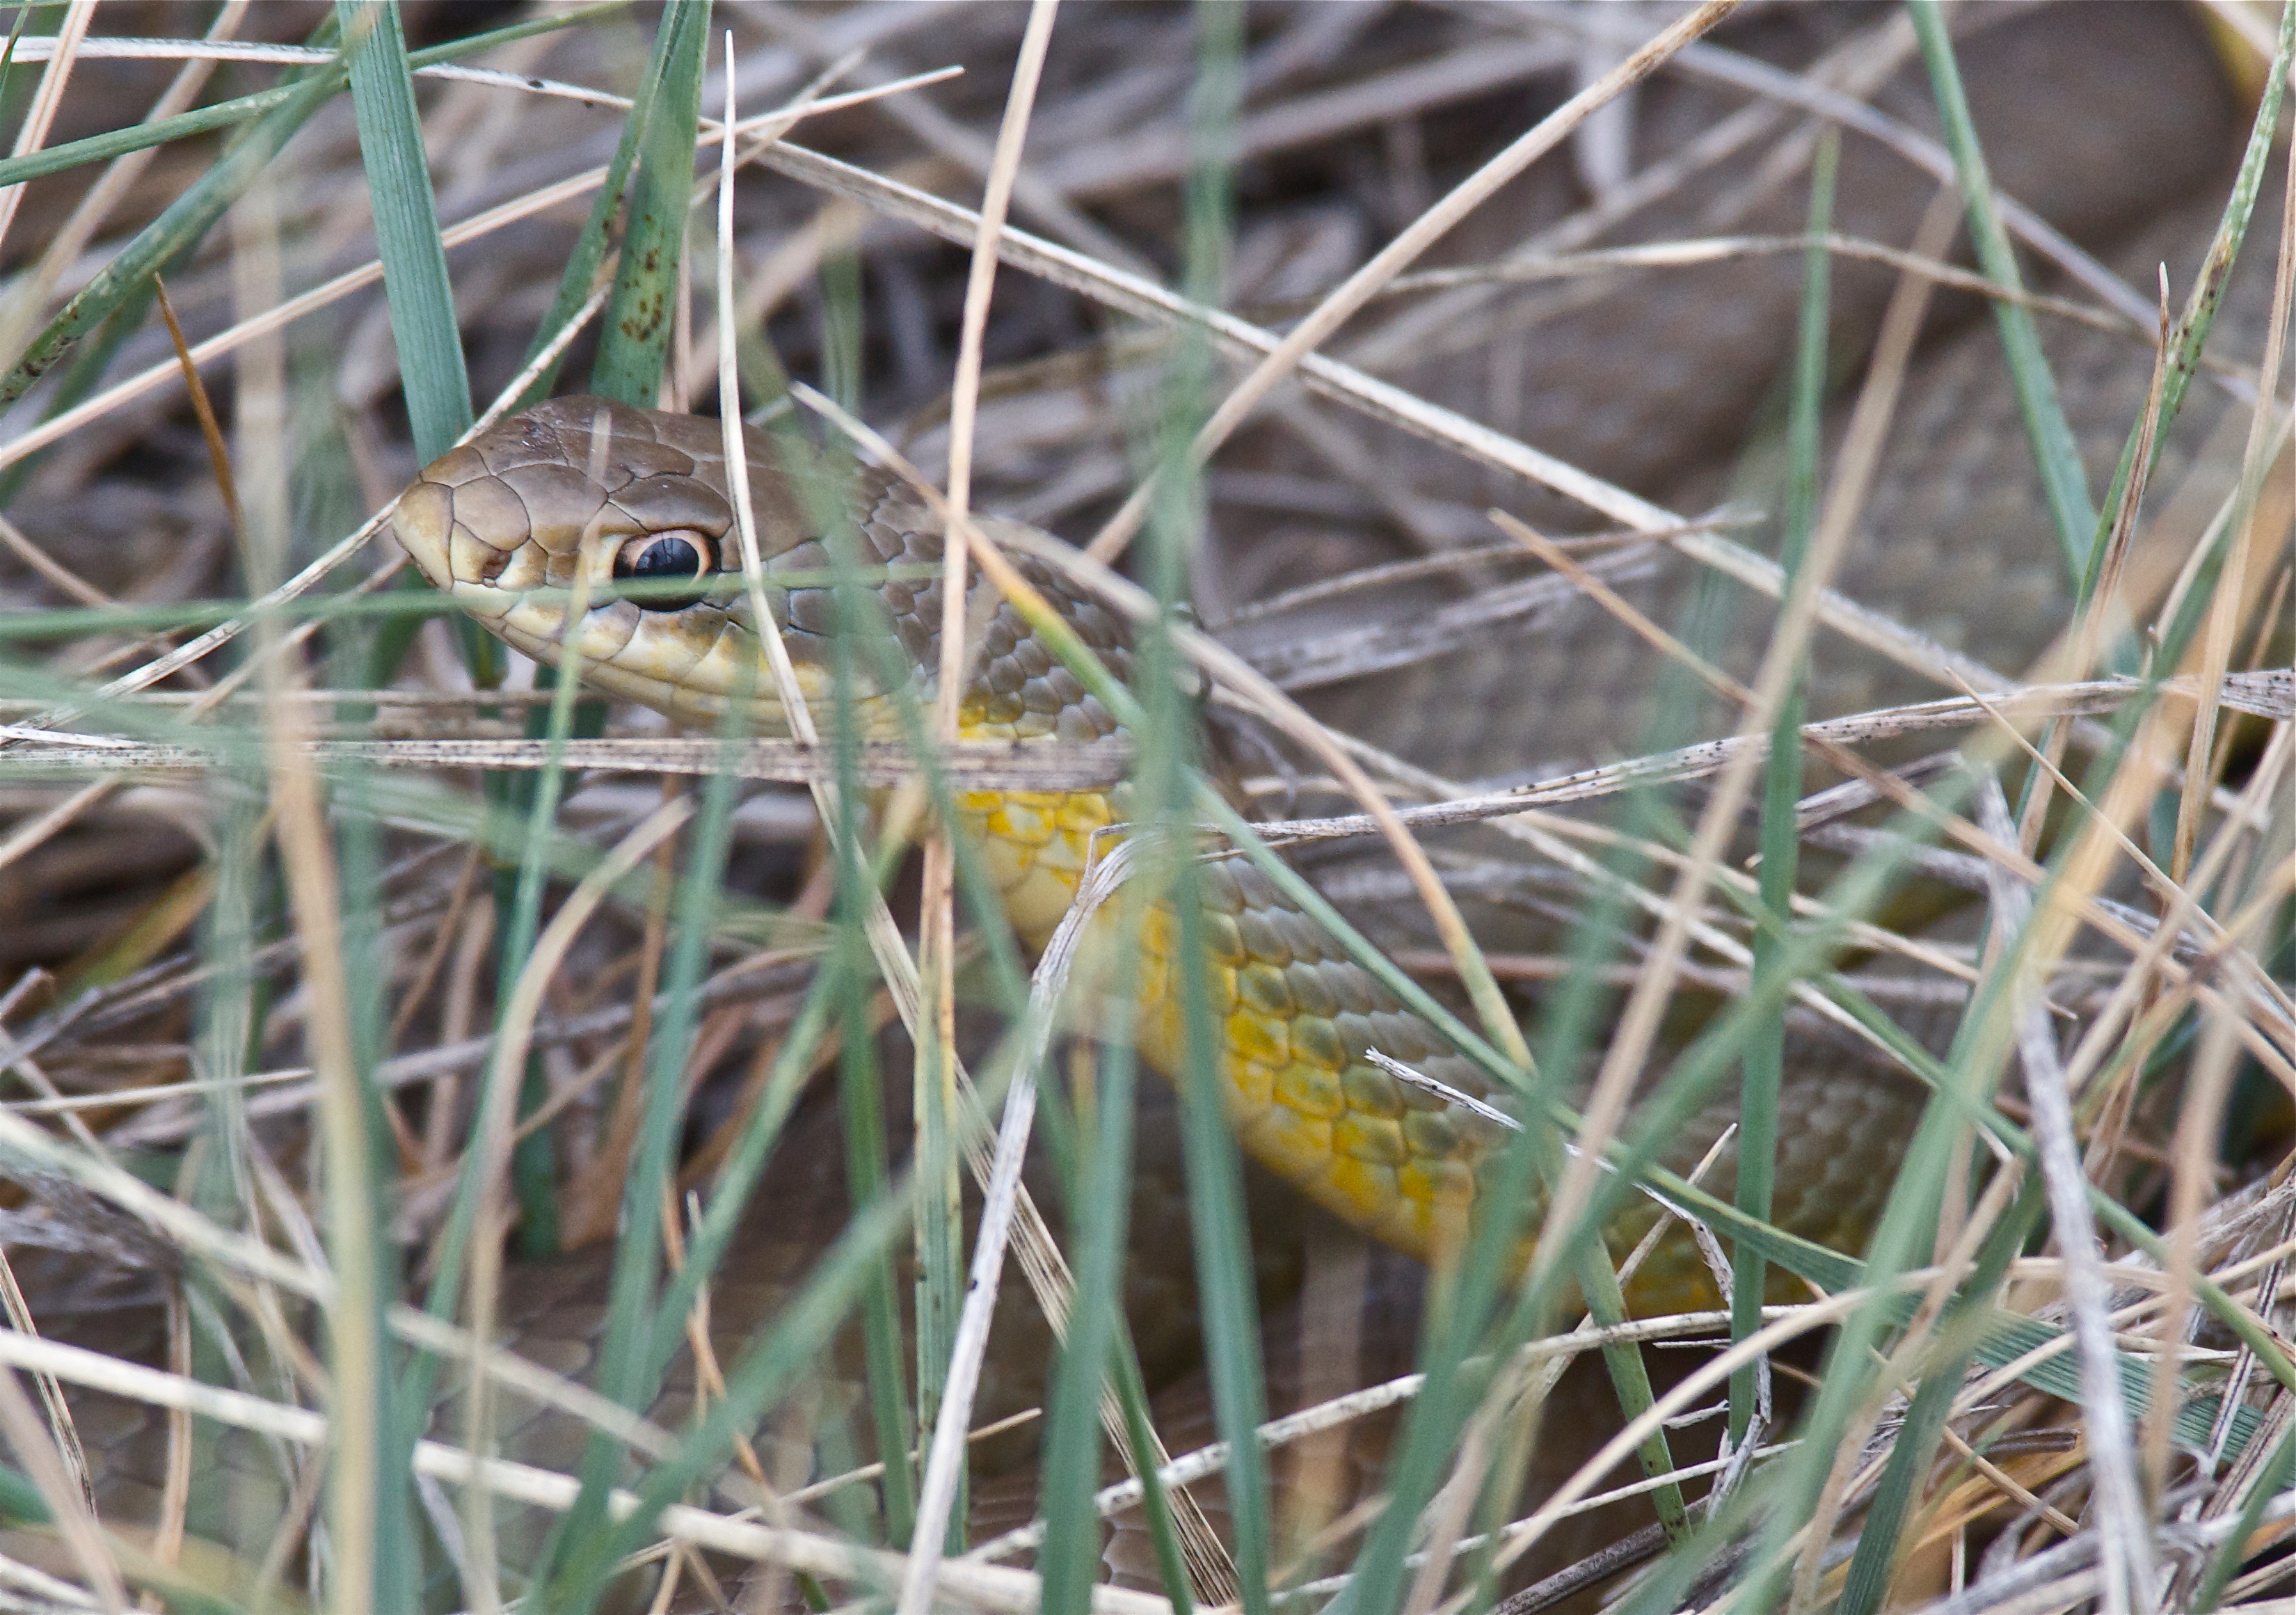 Yellow-Bellied Racer